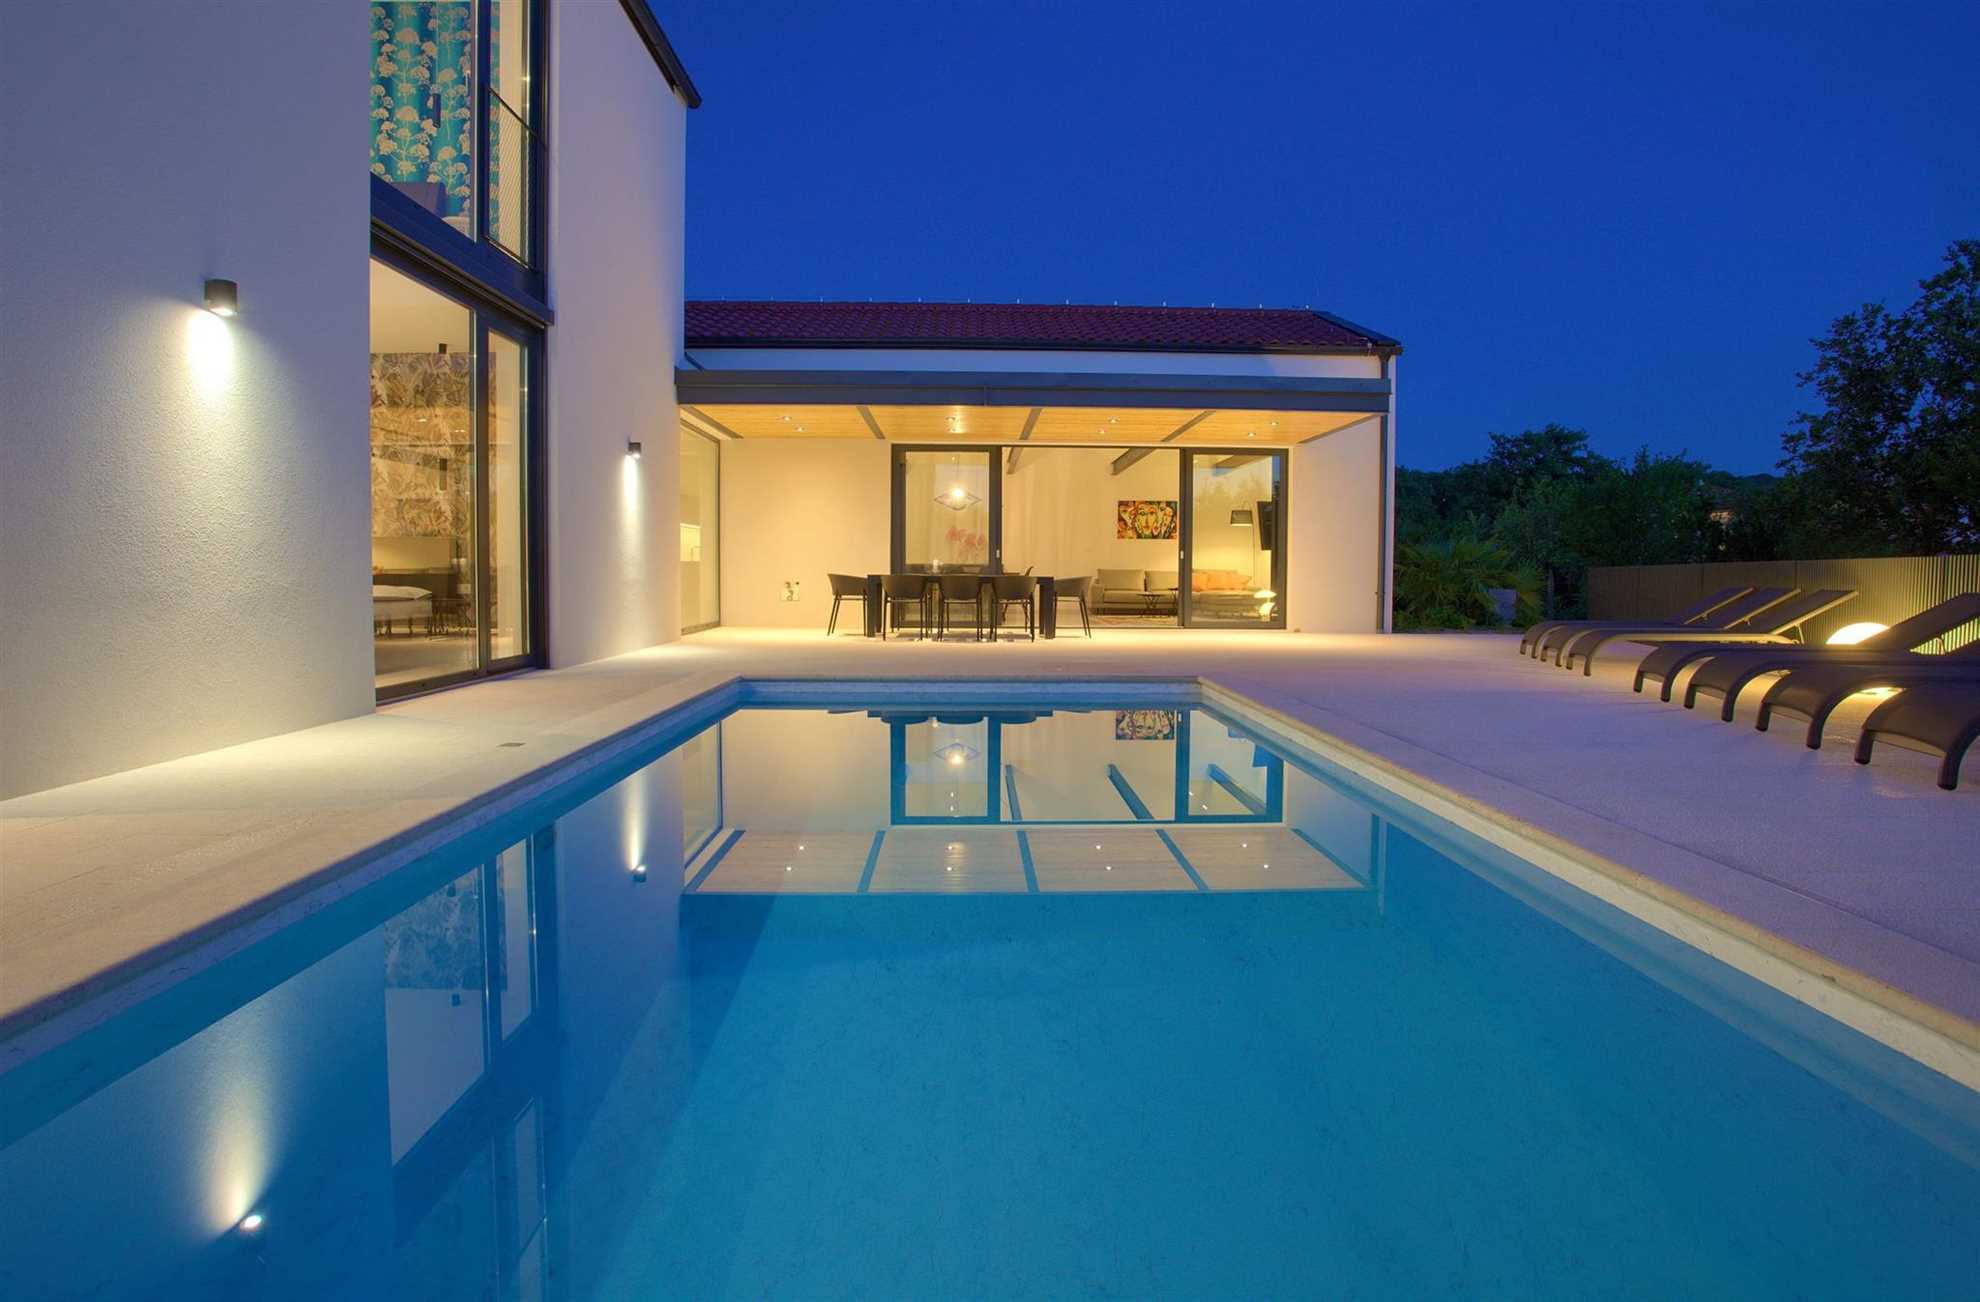 Casa Forma with heated pool, Seaview and luxury of 5 stars